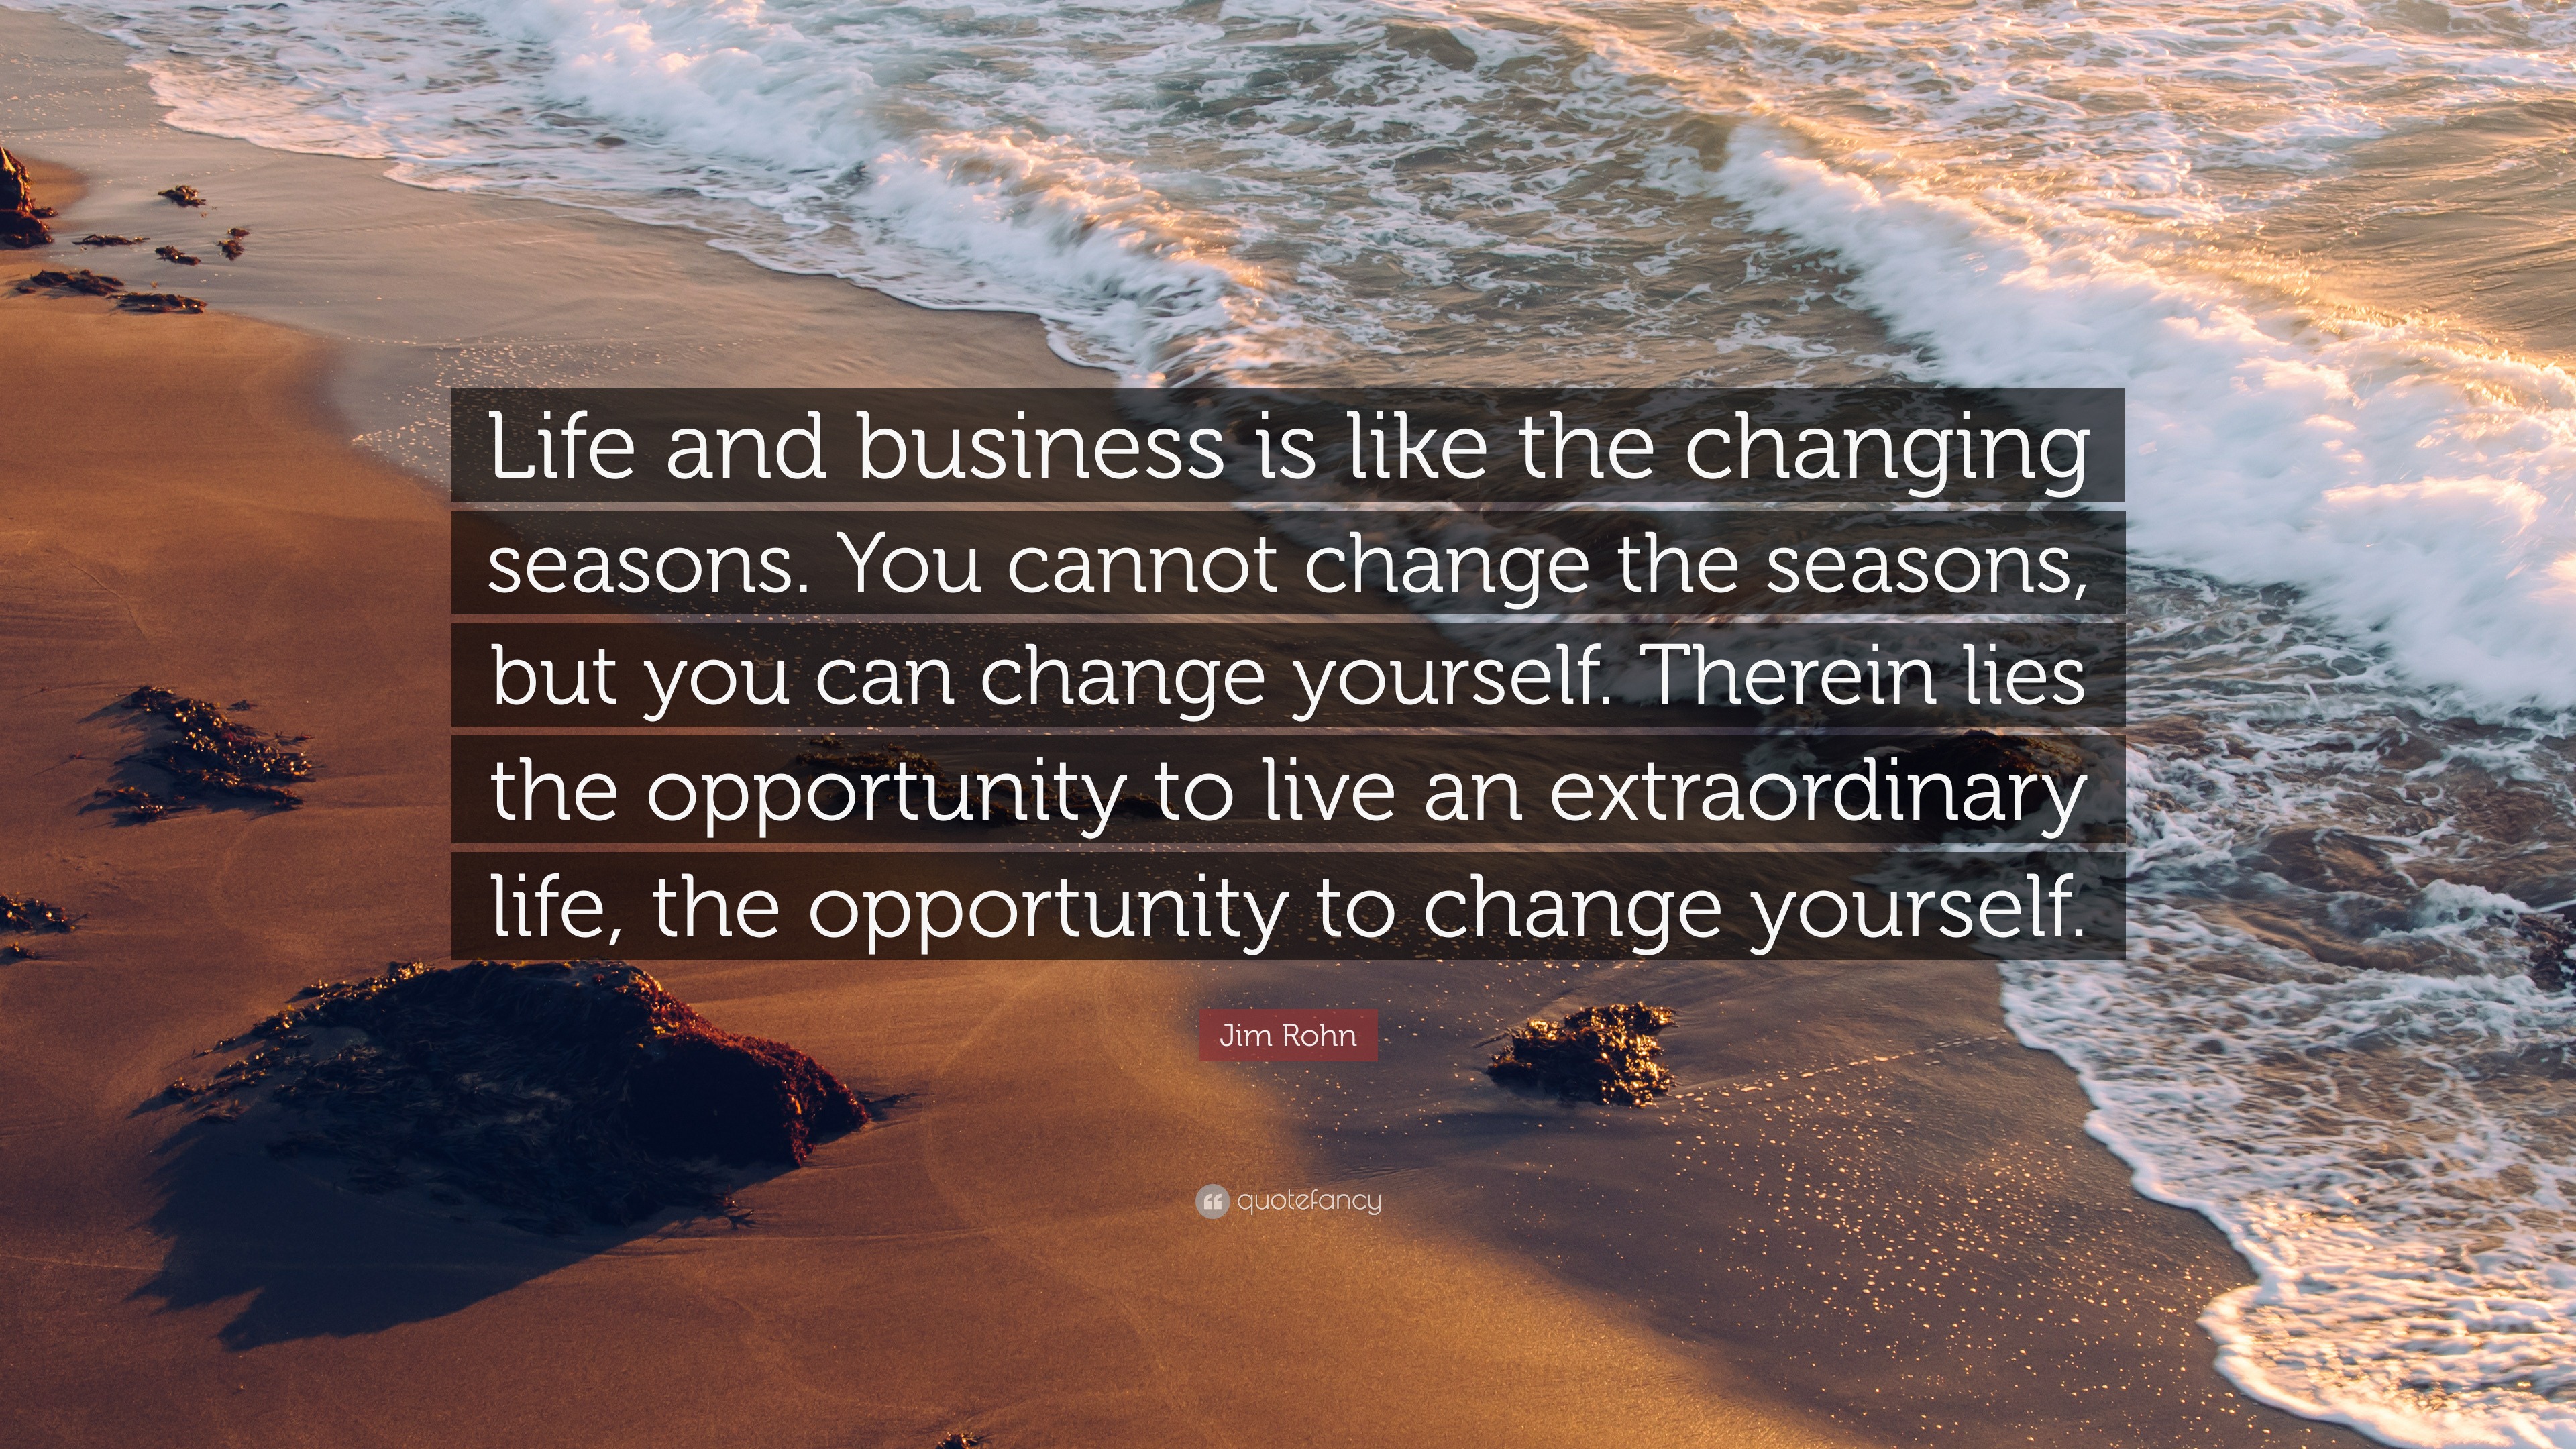 Jim Rohn Quote: “Life and business is like the changing seasons. You ...